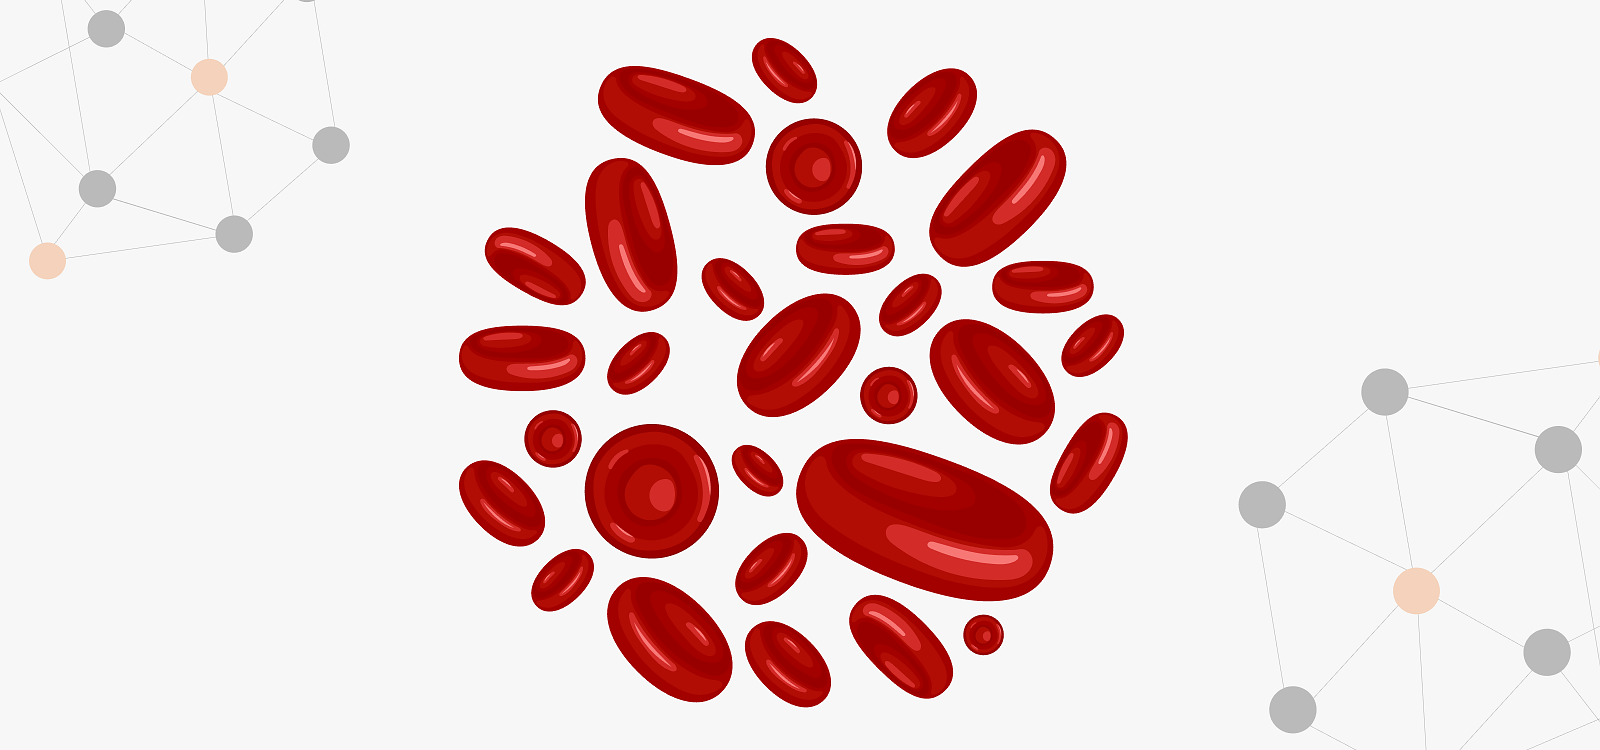 Parameter Tuesday: RED BLOOD CELLS 